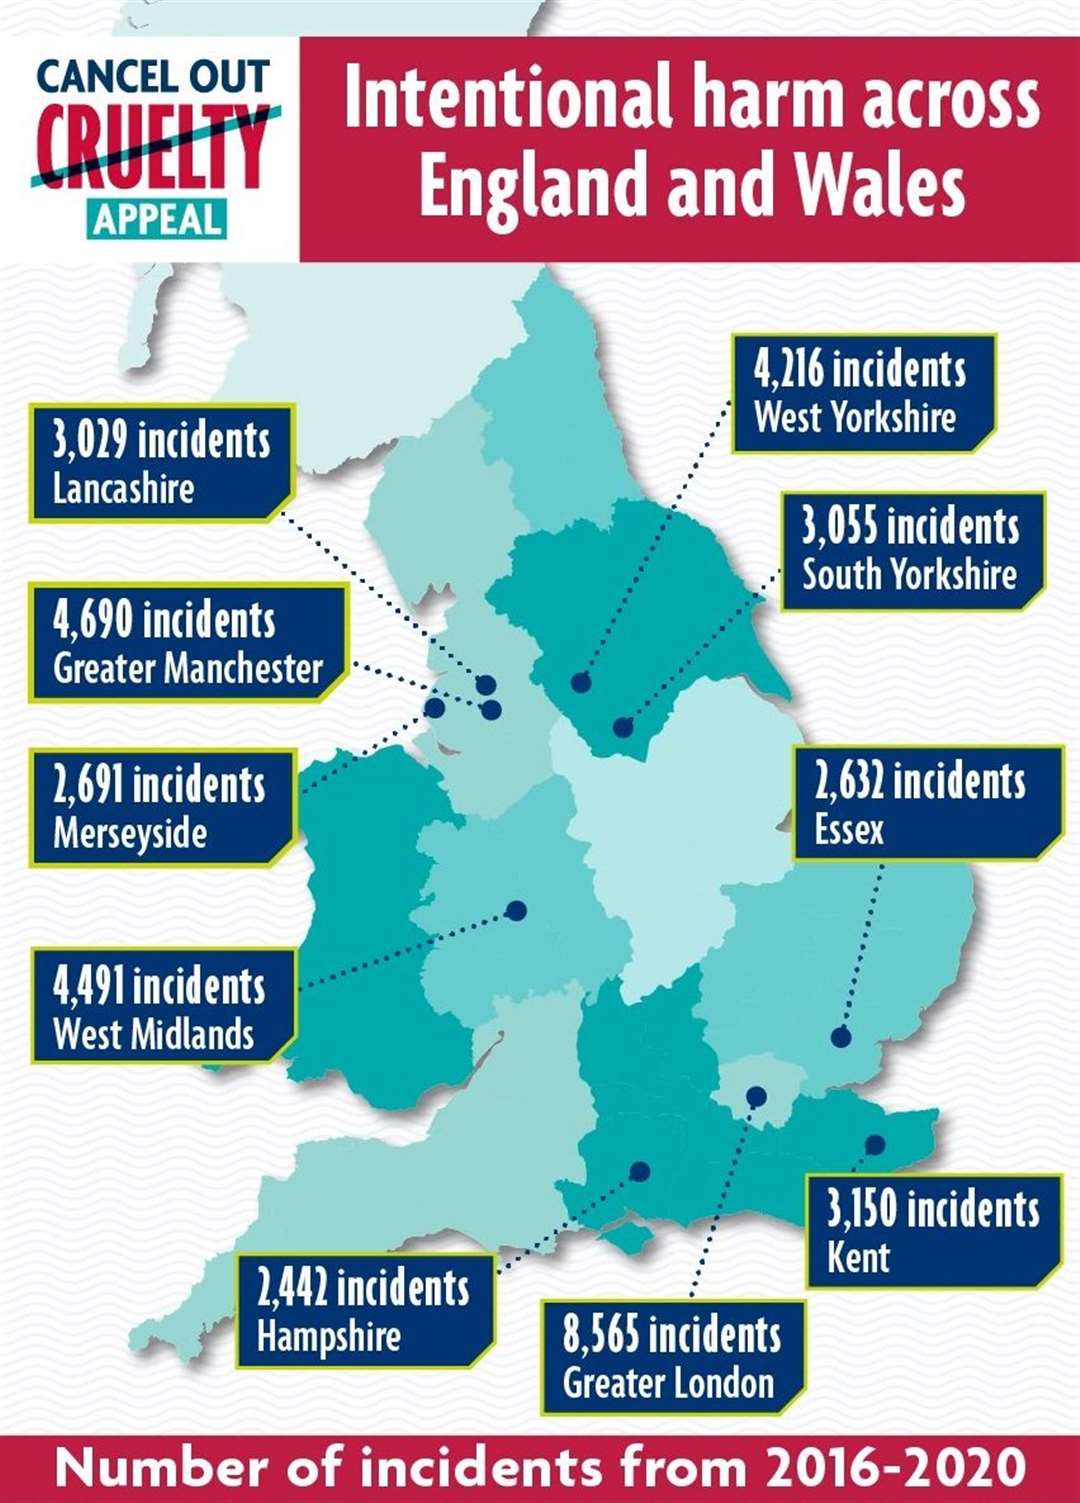 Some 3,150 incidents have been reported in Kent over the last five years